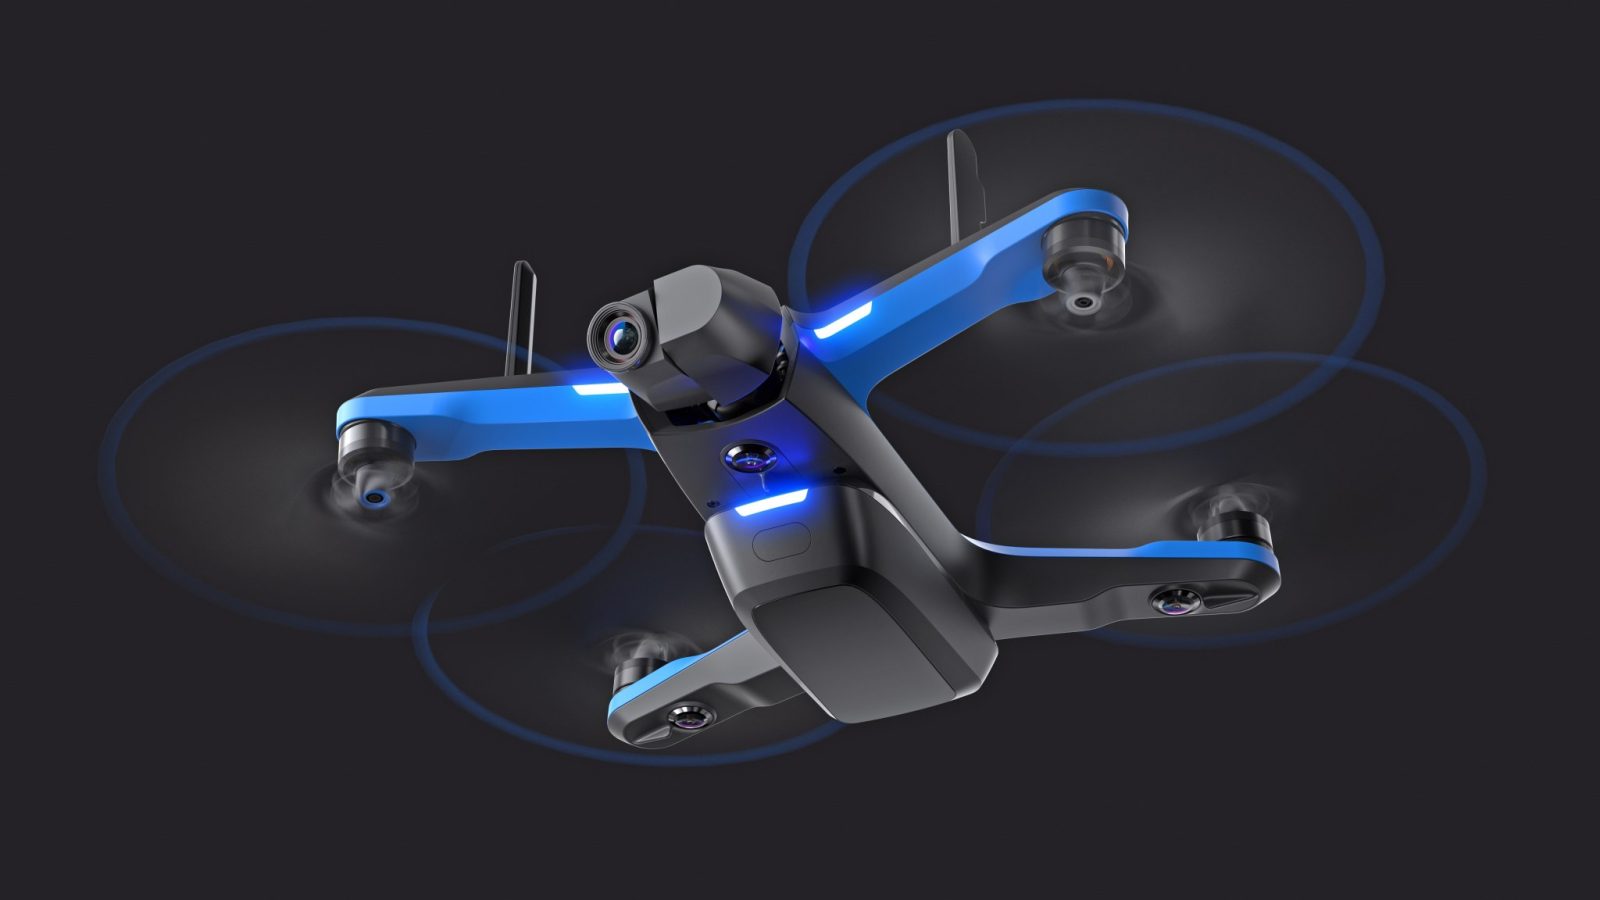 Skydio drone India remote id software update